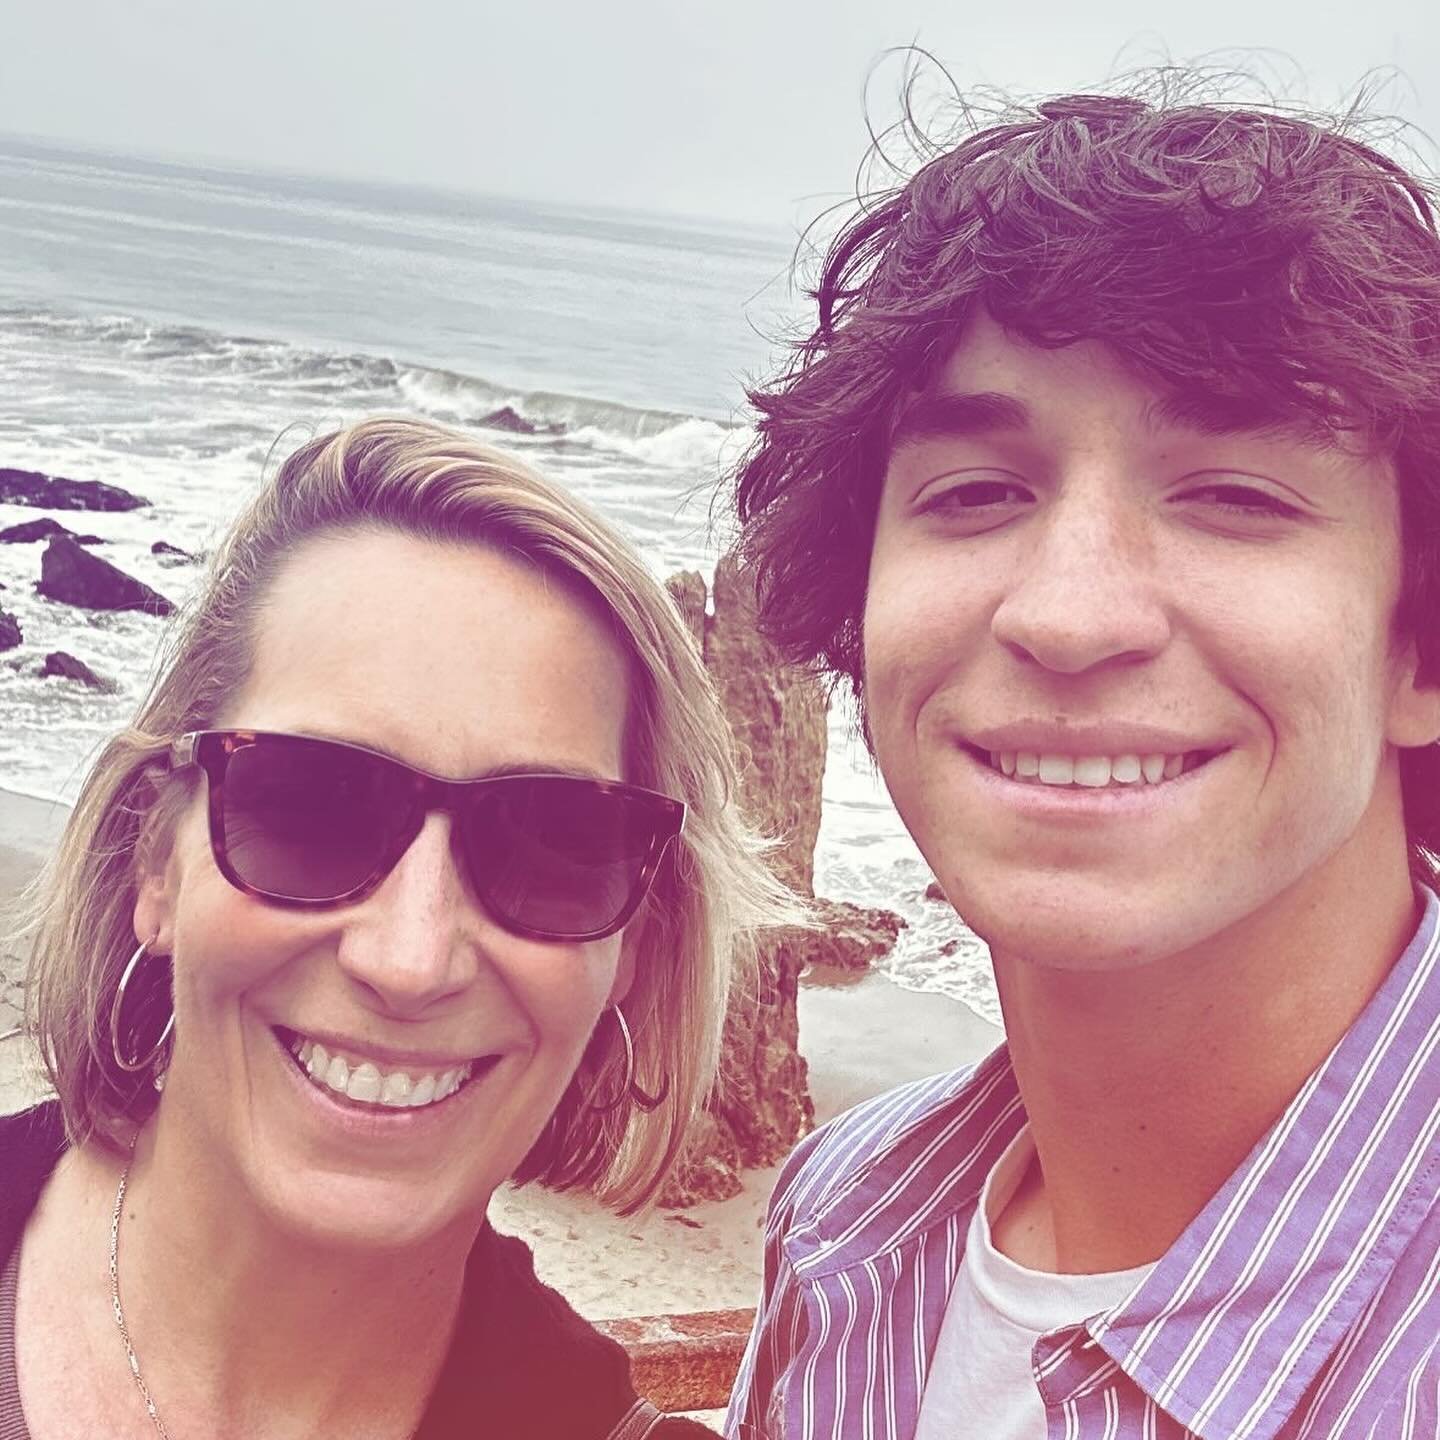 Donuts for breakfast, followed by a beach day. Mother&rsquo;s Day doesn&rsquo;t get much better than that! 🍩🌊